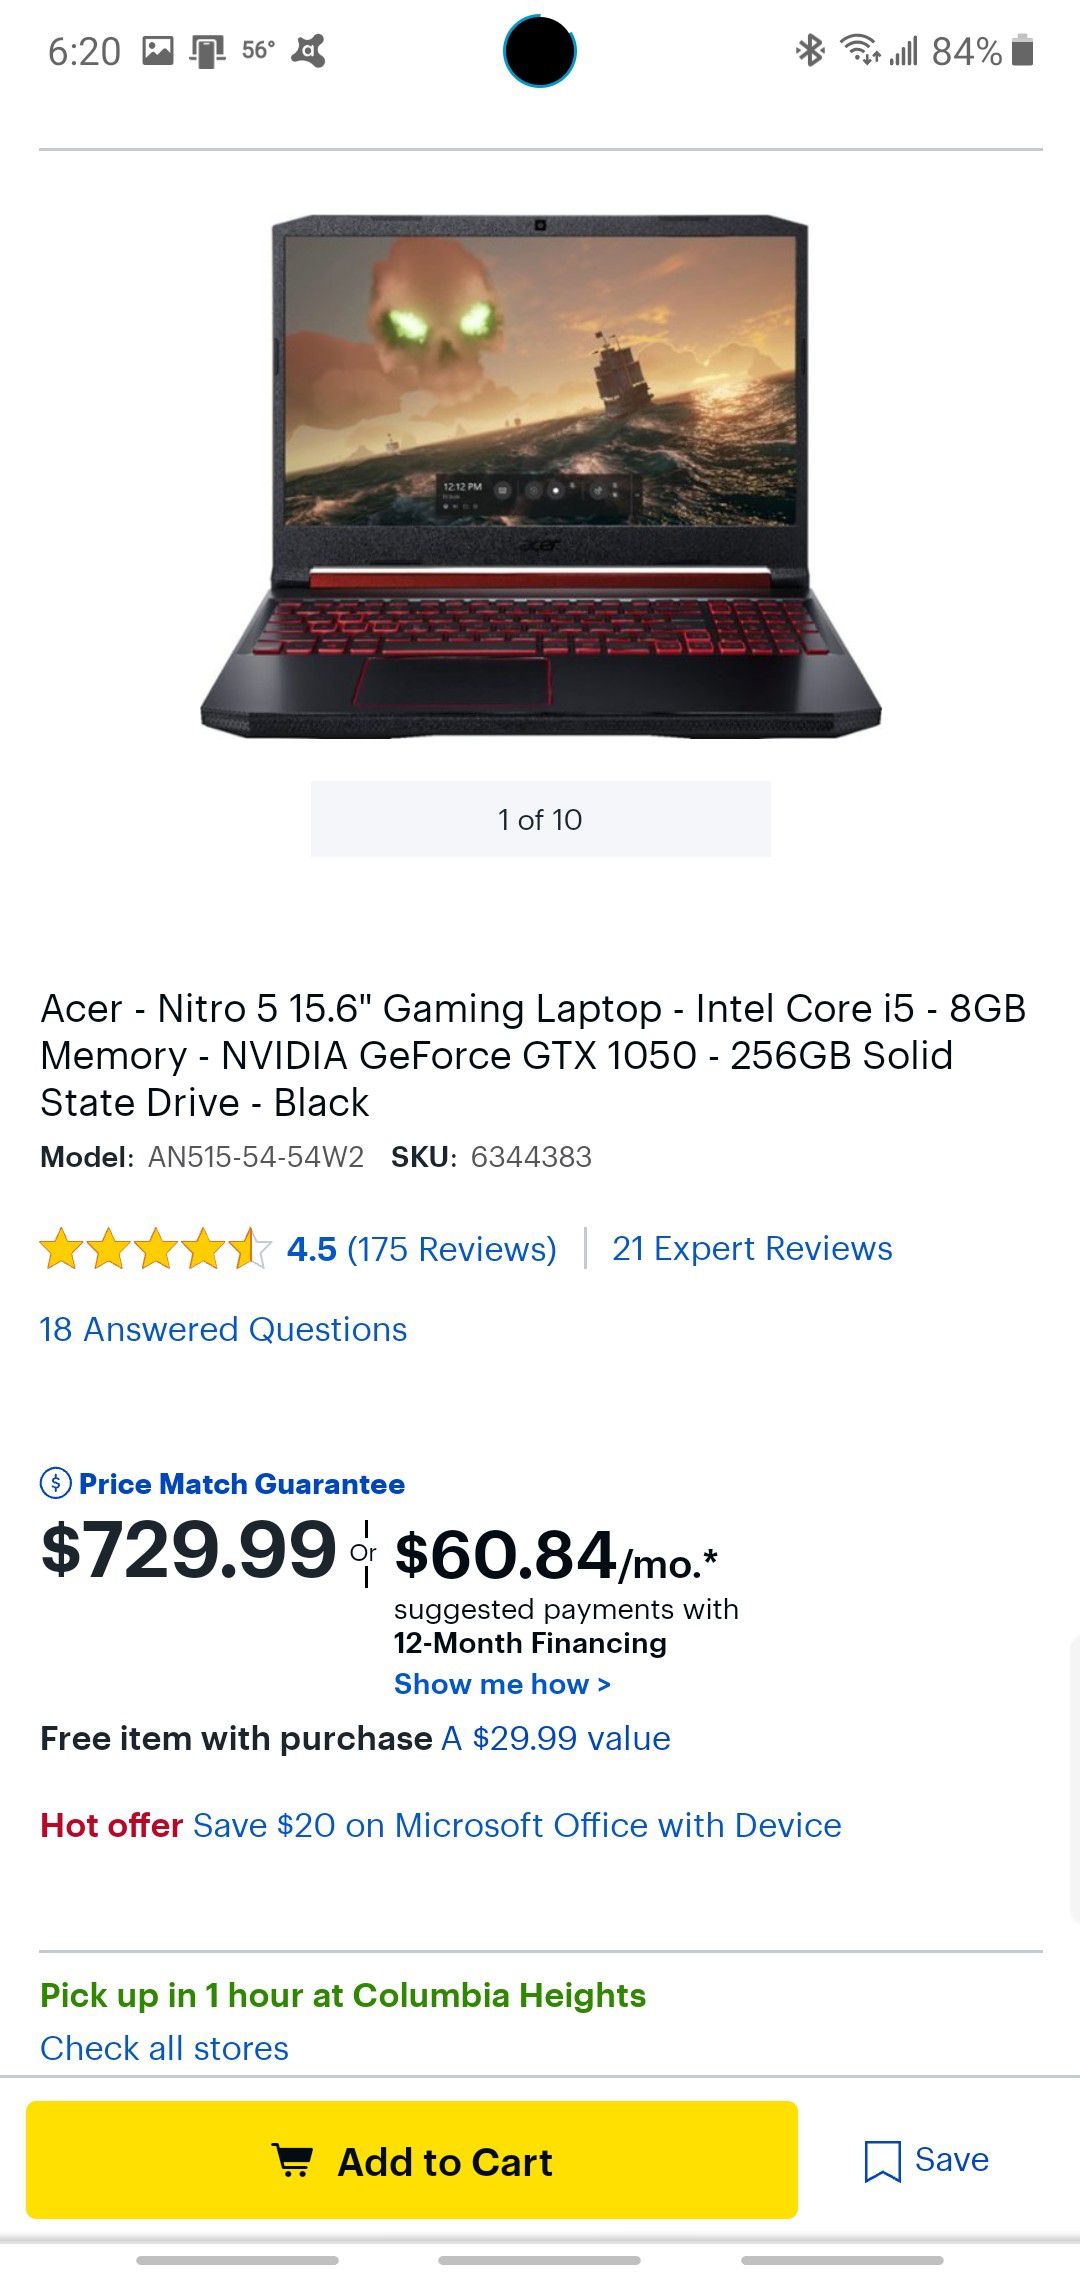 ASUS Laptop, perfect for Serious Gaming/Studying/Business (only used for 3 months)